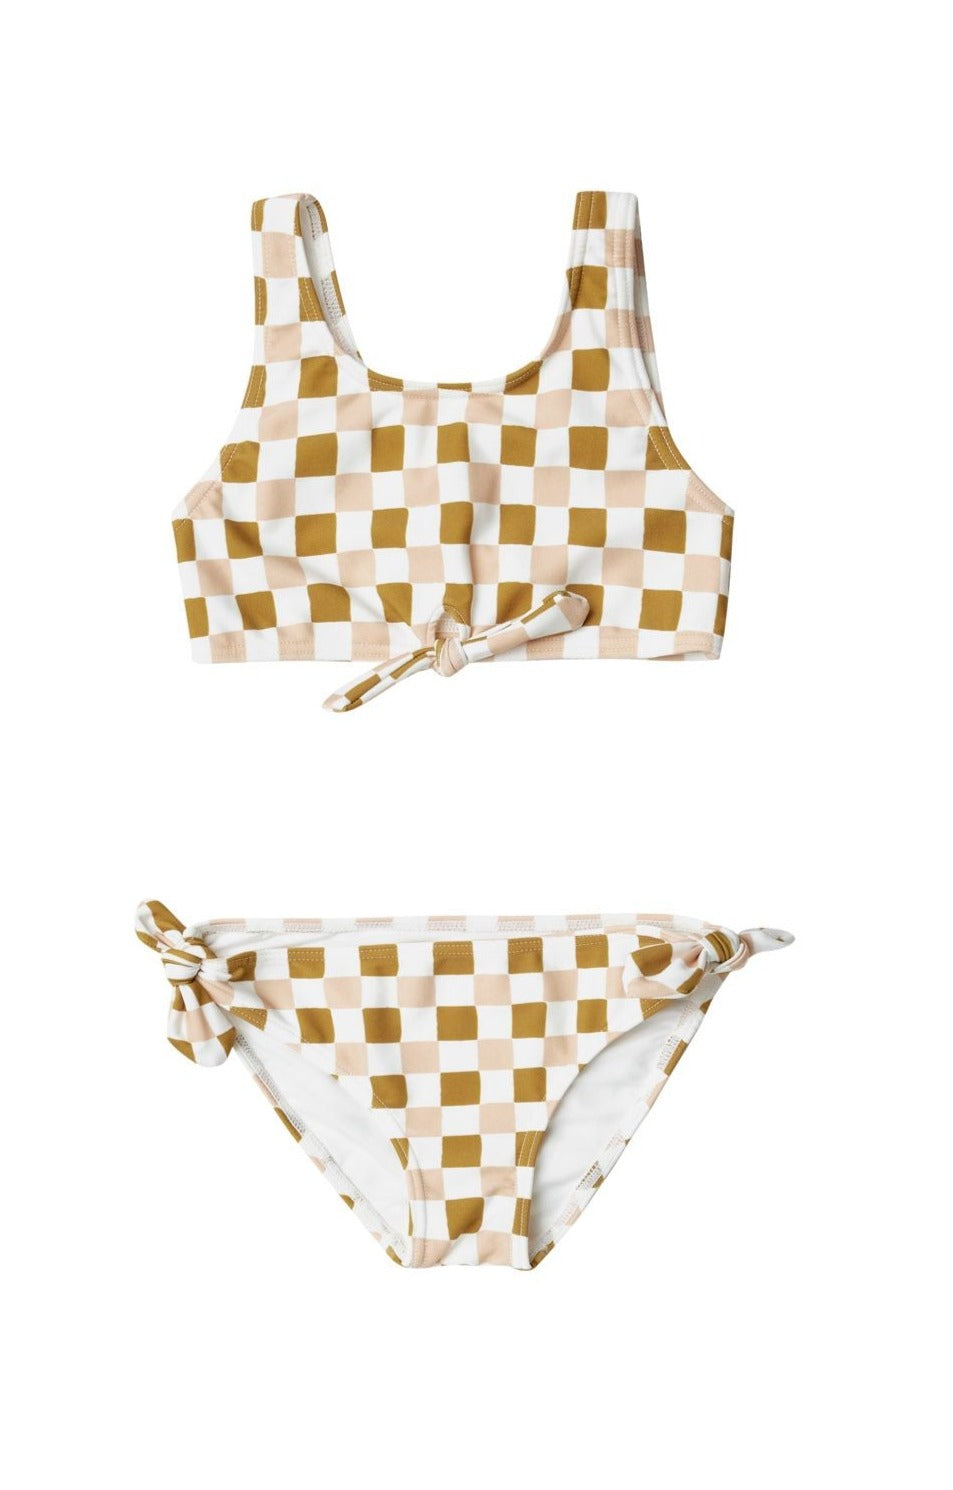 The Knotted Bikini Swimsuit by Rylee and Cru - BABY – THE SKINNY